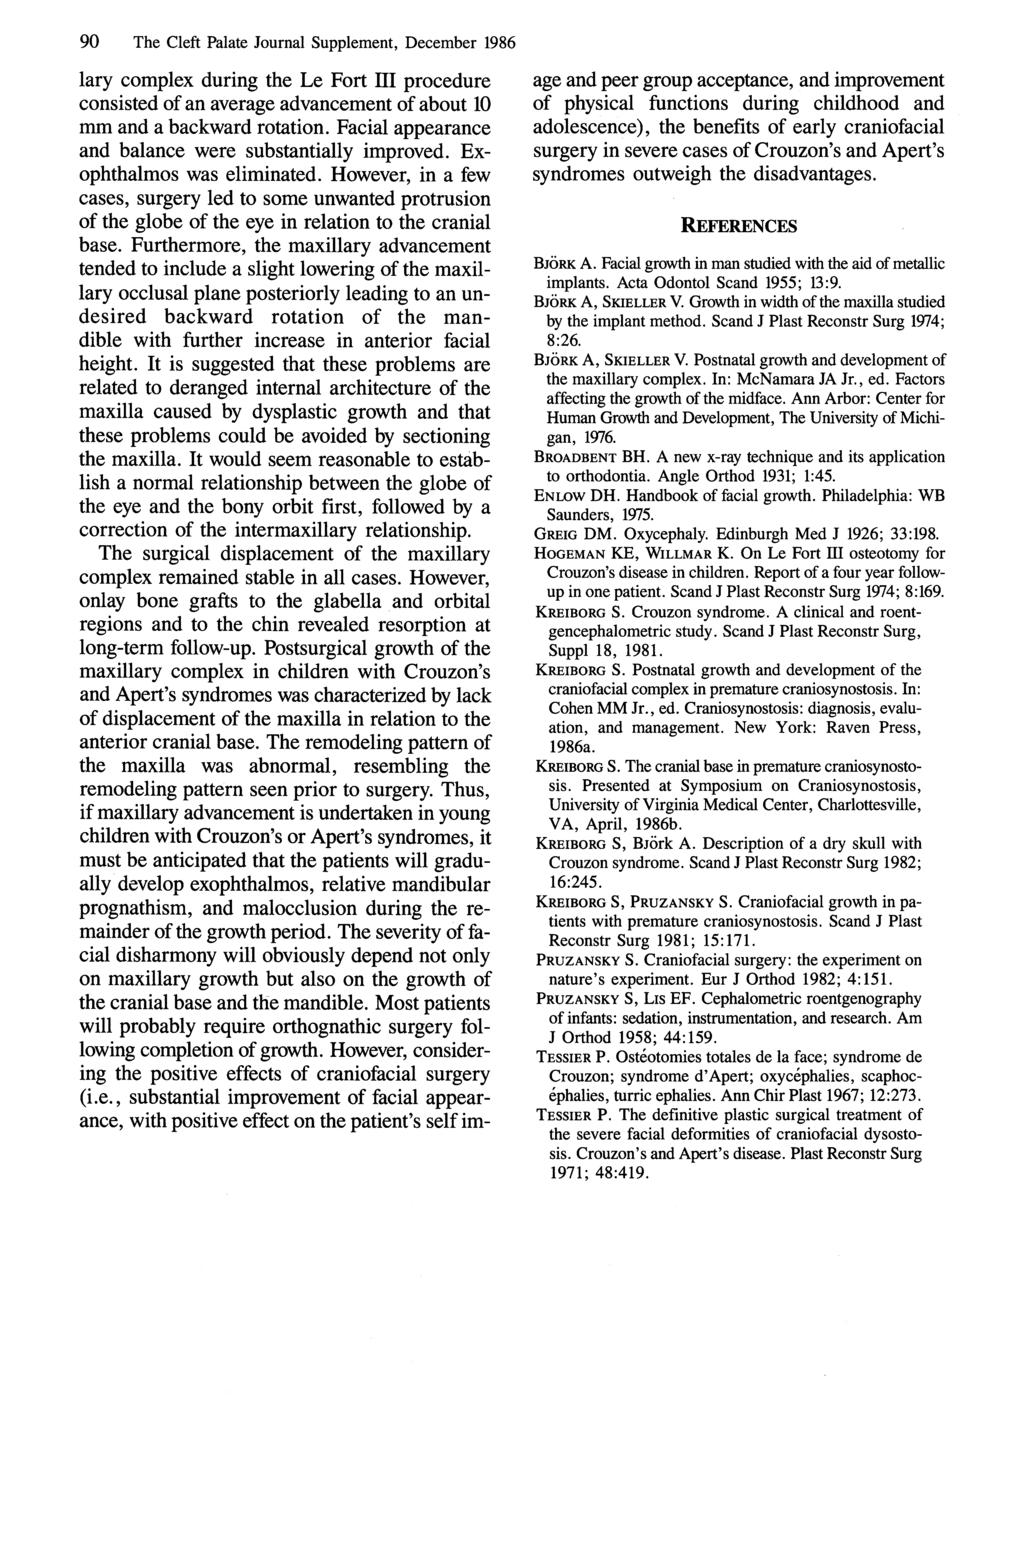 90 The Cleft Palate Journal Supplement, December 1986 lary complex during the Le Fort III procedure consisted of an average advancement of about 10 mm and a backward rotation.